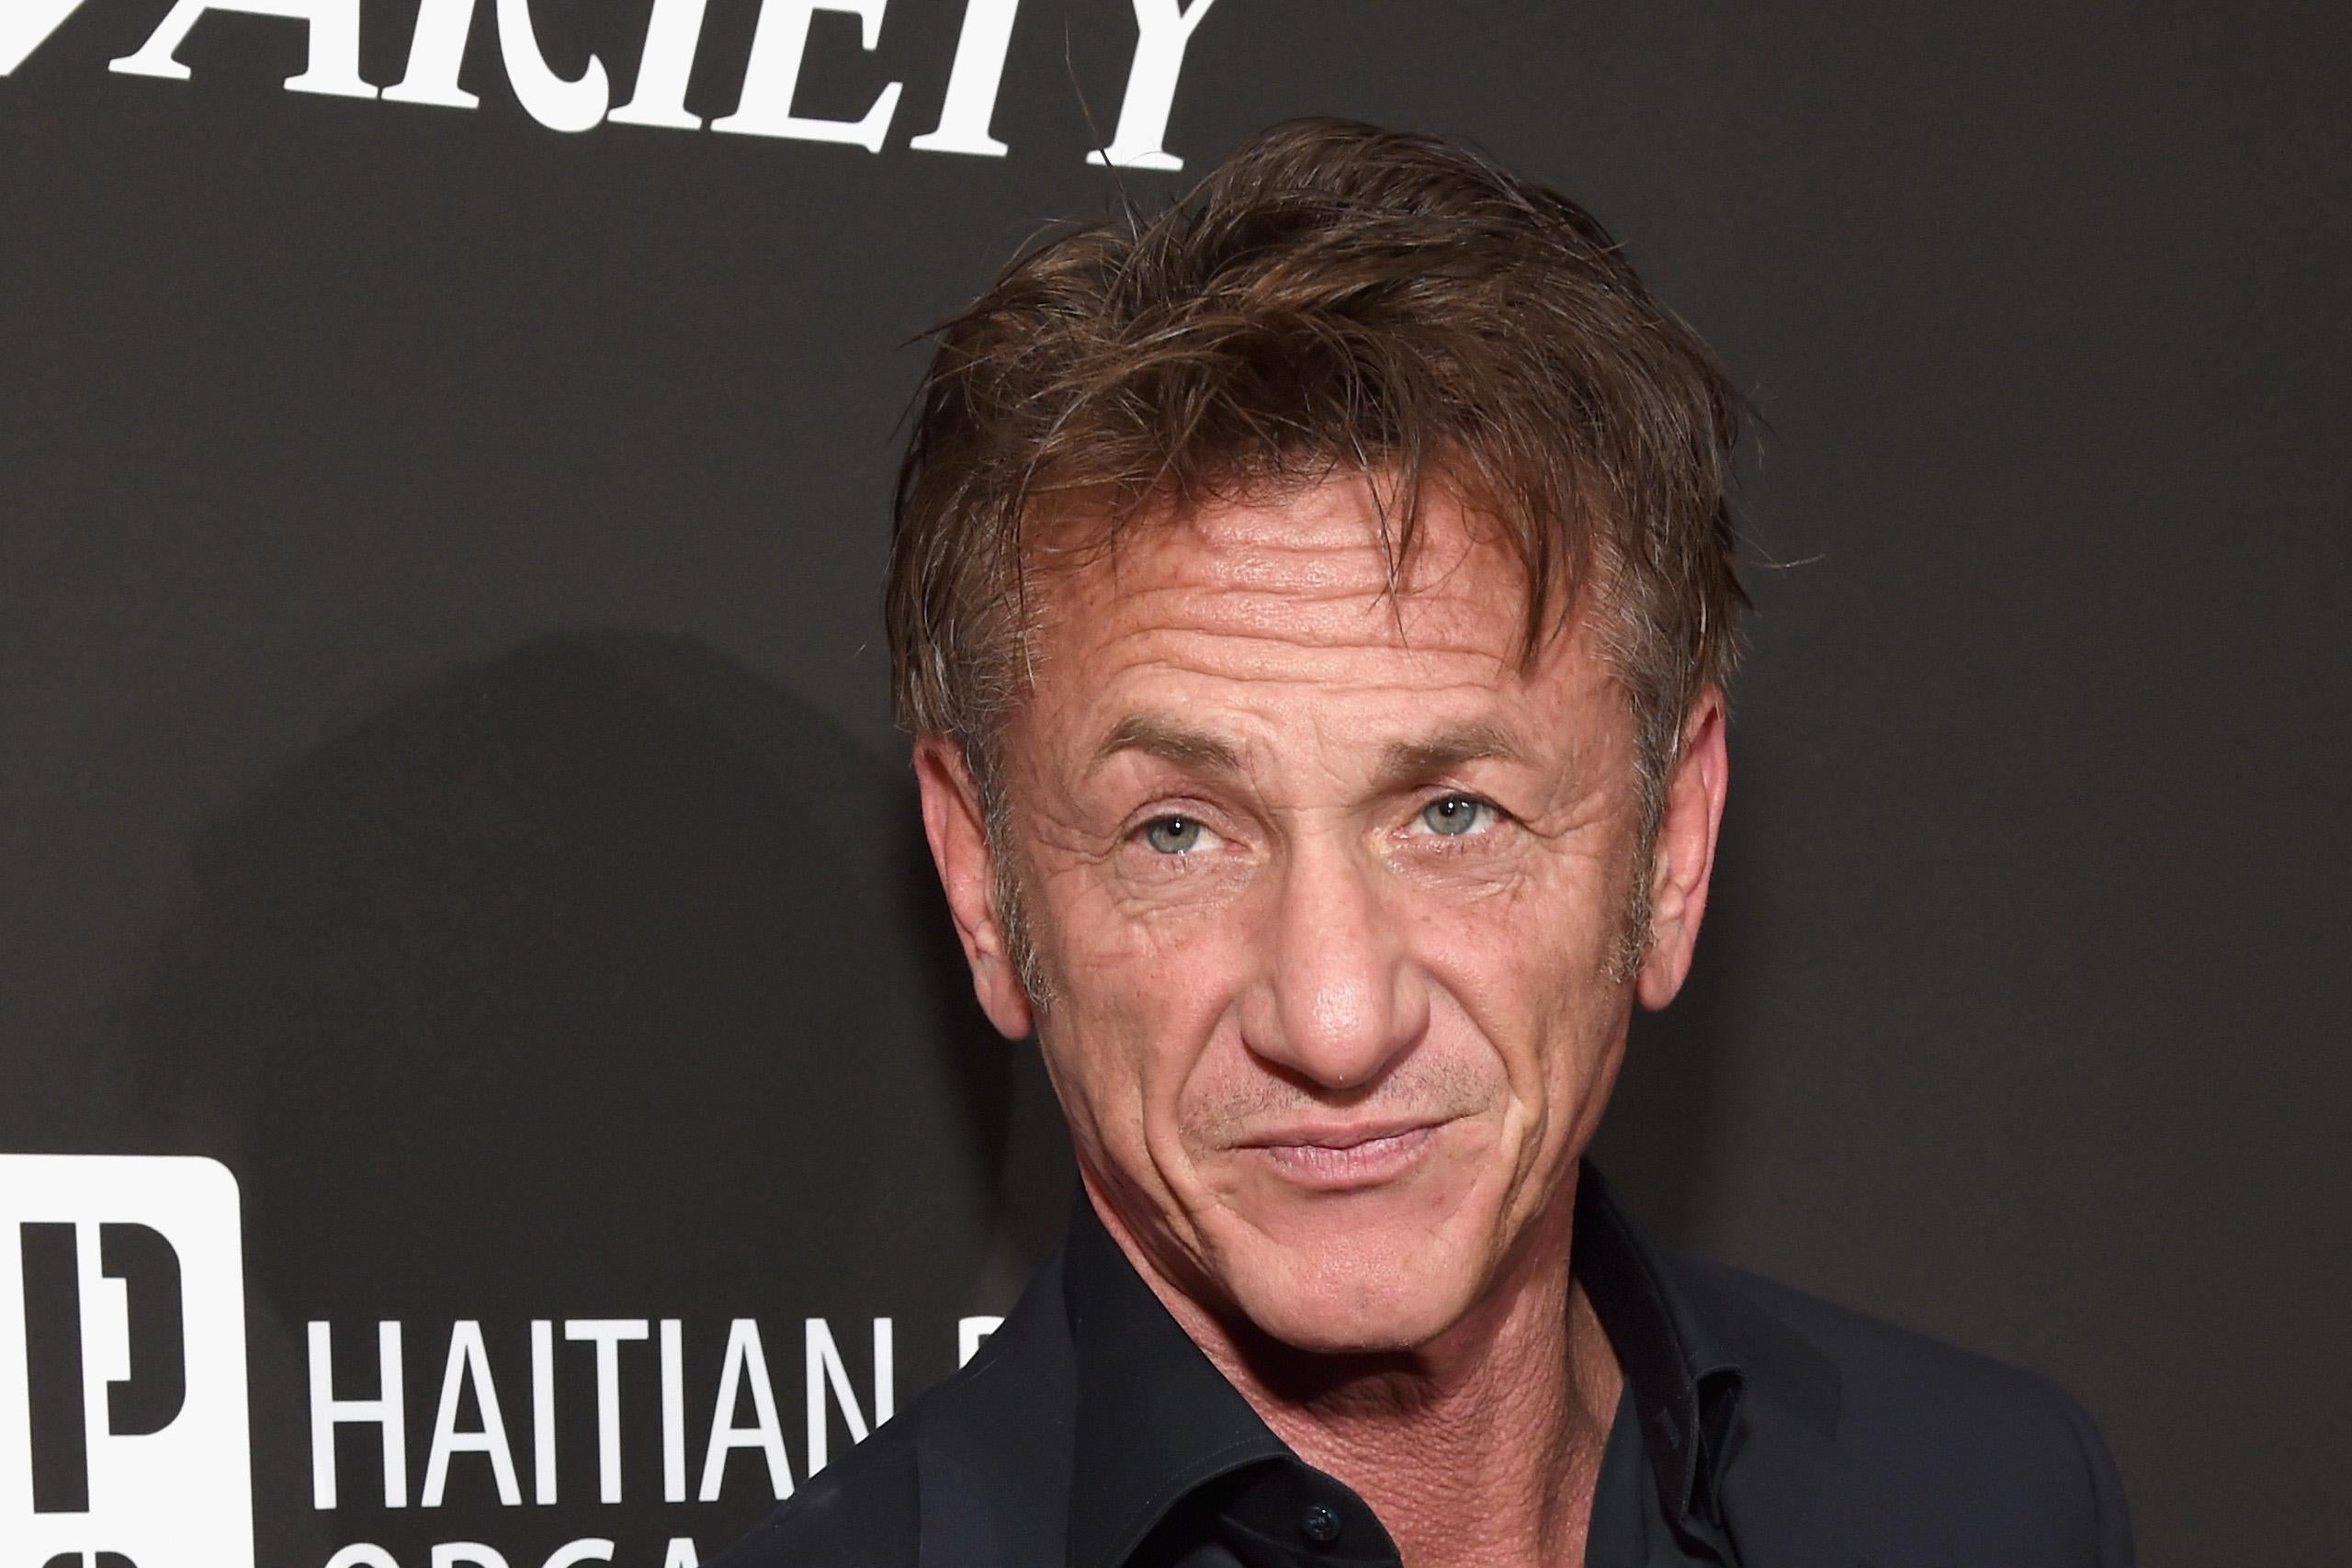 Sean Penn stands in front a black wall, wearing a black suit.